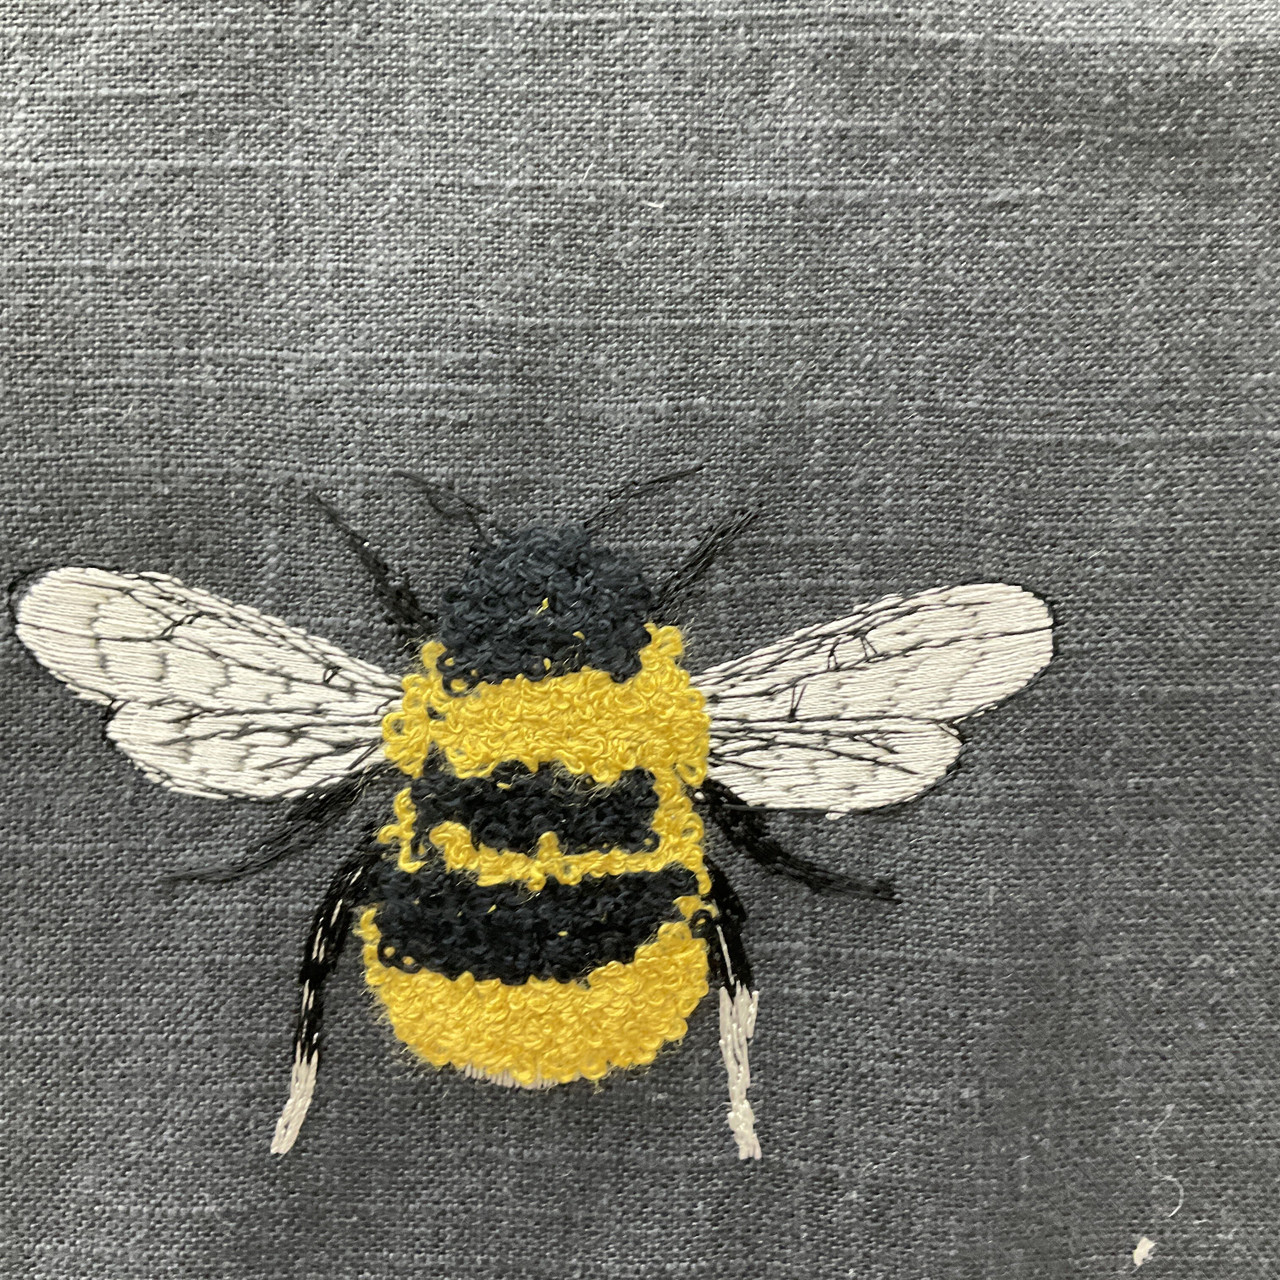 Bee Happy Black Clamshell by Andover Fabrics Sold by the Yard Cut  Continuous in Stock Ships Today -  Ireland